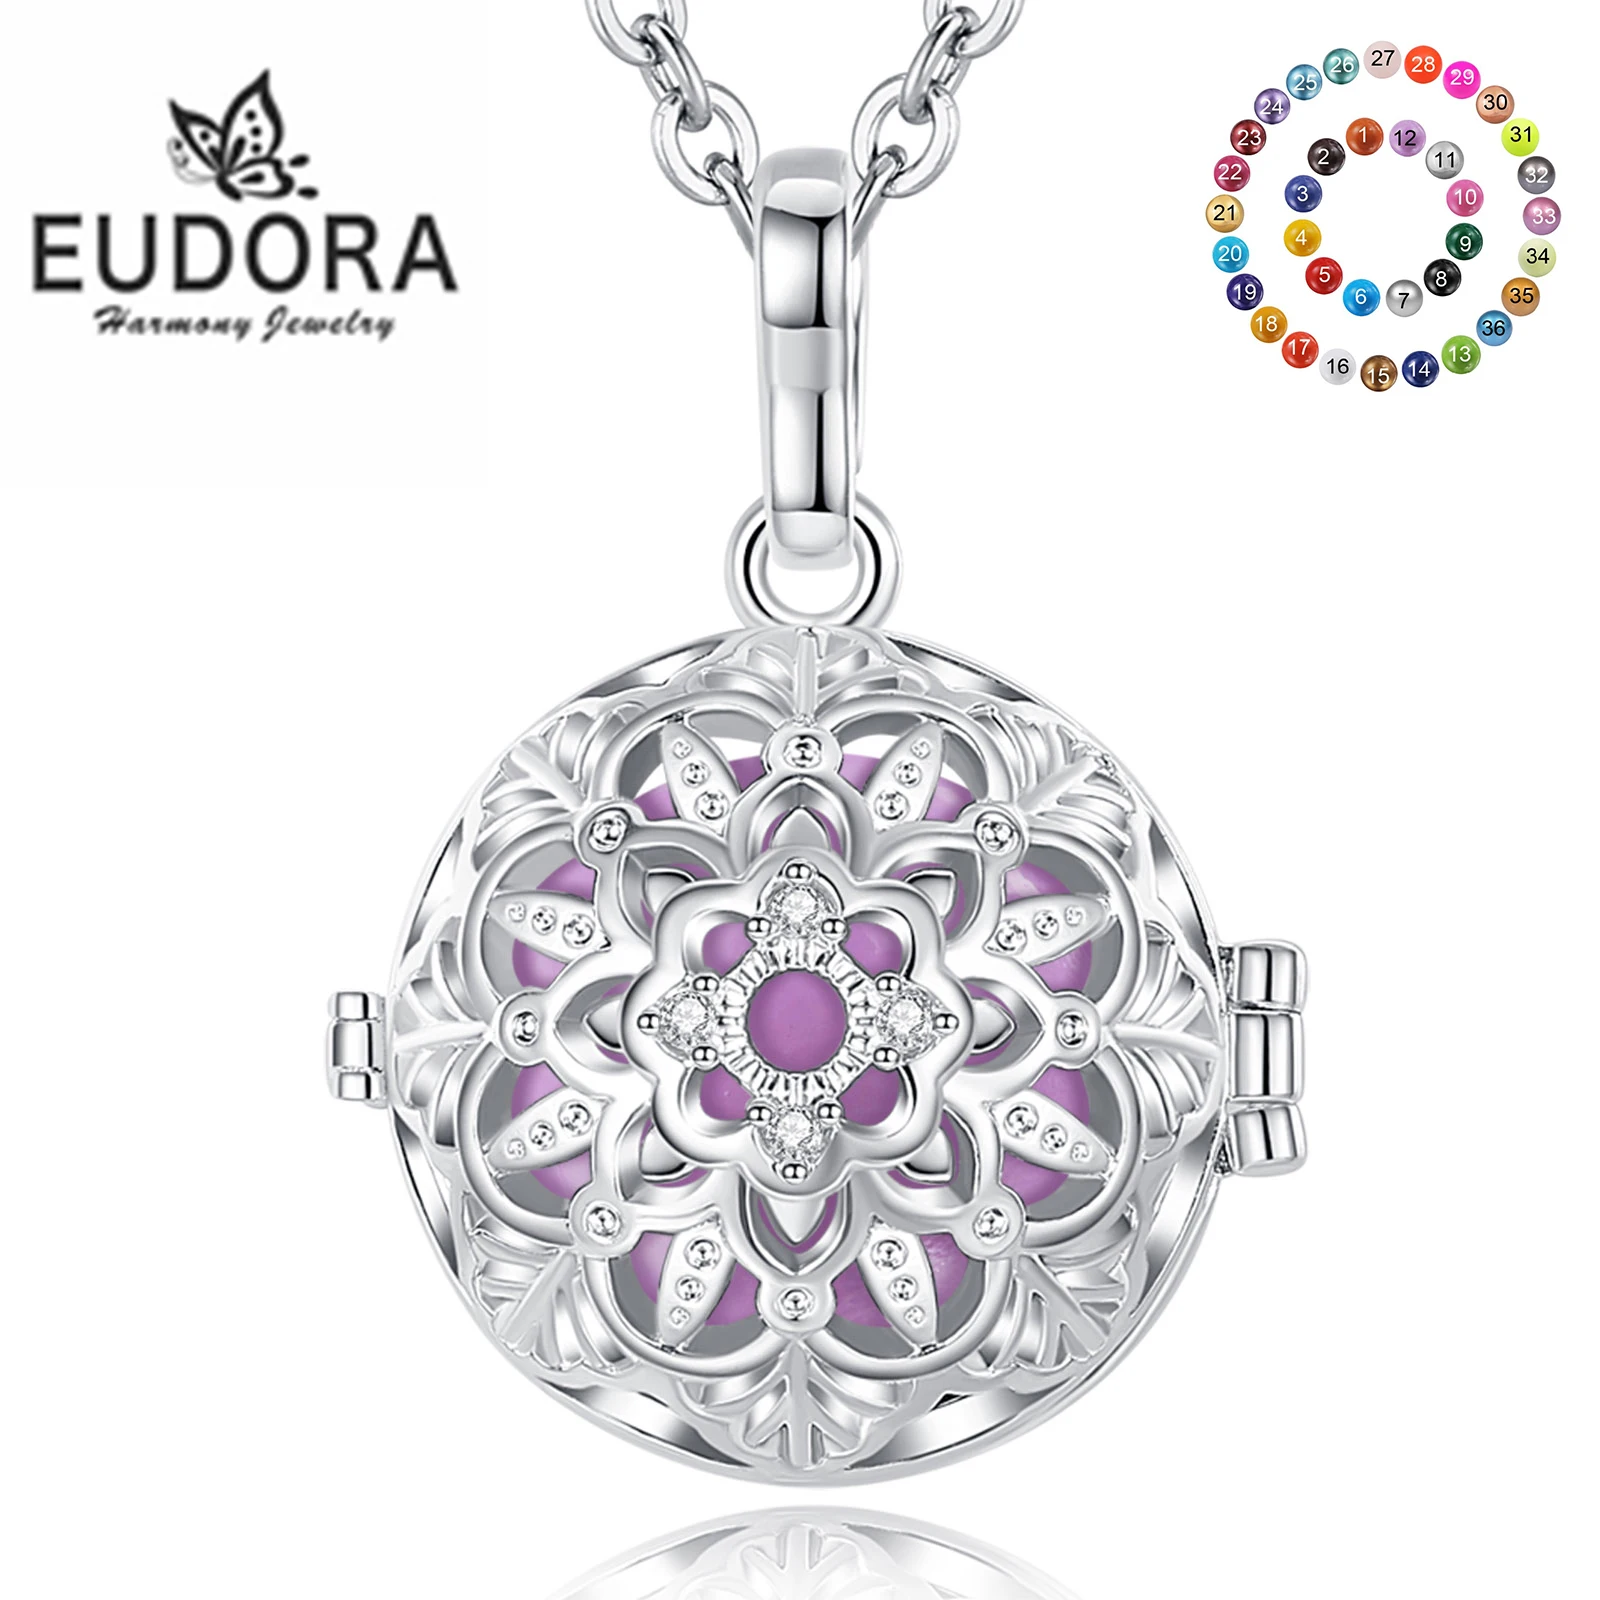 

Eudora 18mm Harmony Ball Chime Bell Pendant Lotus Flower Cage Angel Caller Pregnancy Bola Necklace Fashion Jewelry for Women gif